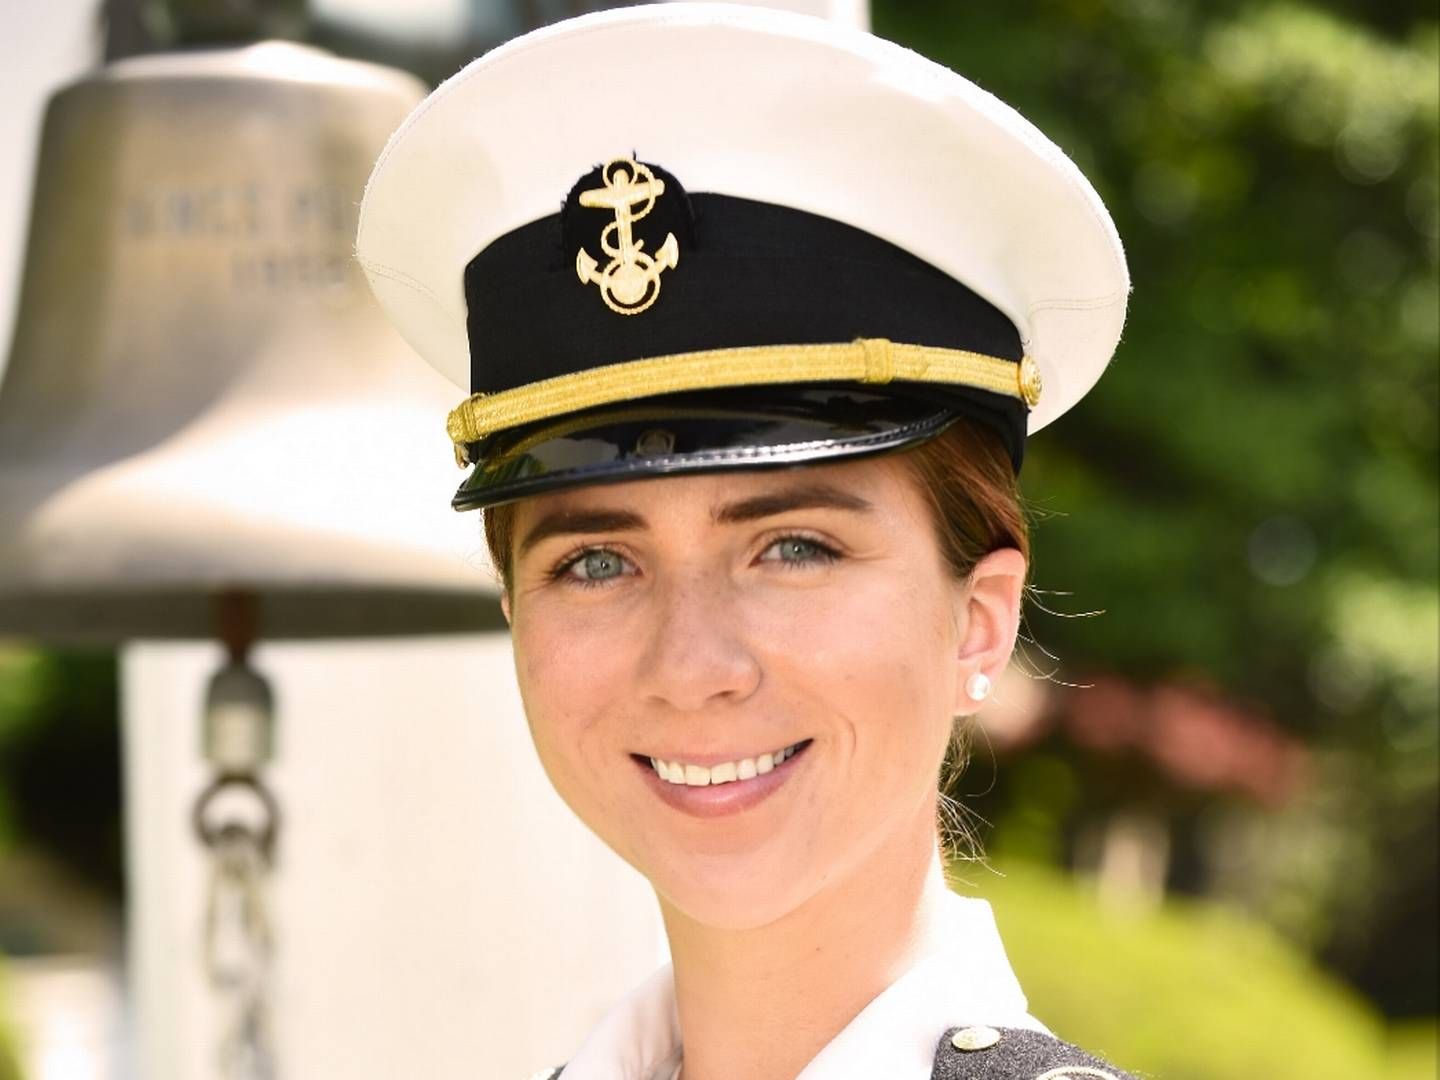 Hope Hicks was assaulted four years ago on the Maersk ship Alliance Fairfax while undergoing naval cadet training on the ship, and later shared her story in a blog post. | Photo: Maritime Legal Solutions